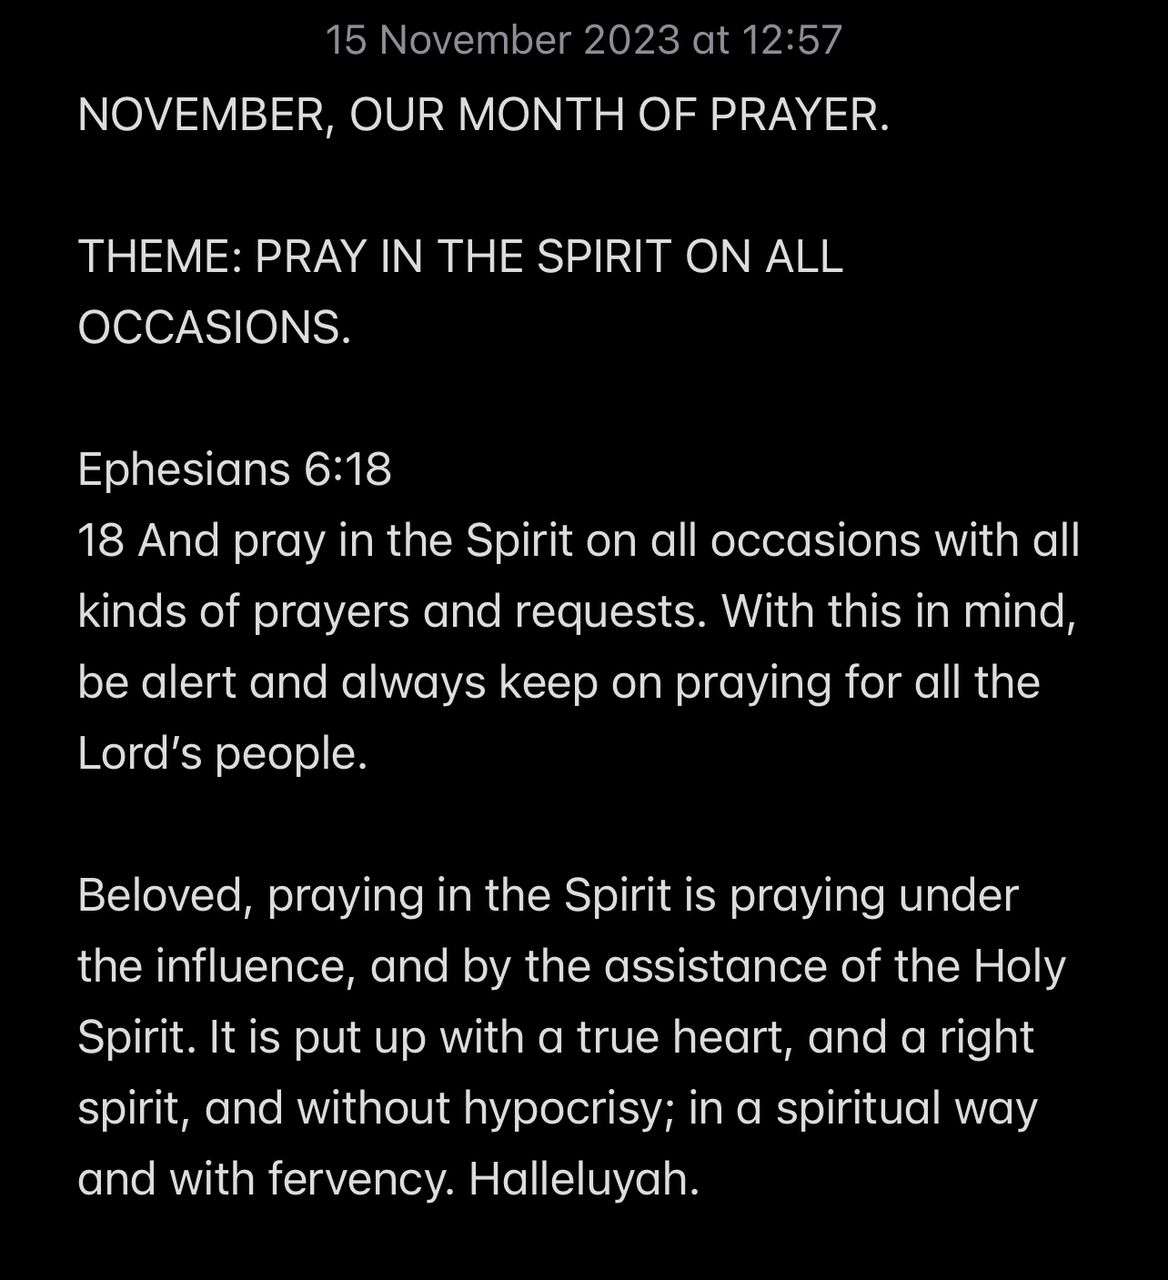 PRAY IN THE SPIRIT ON ALL OCCASIONS.